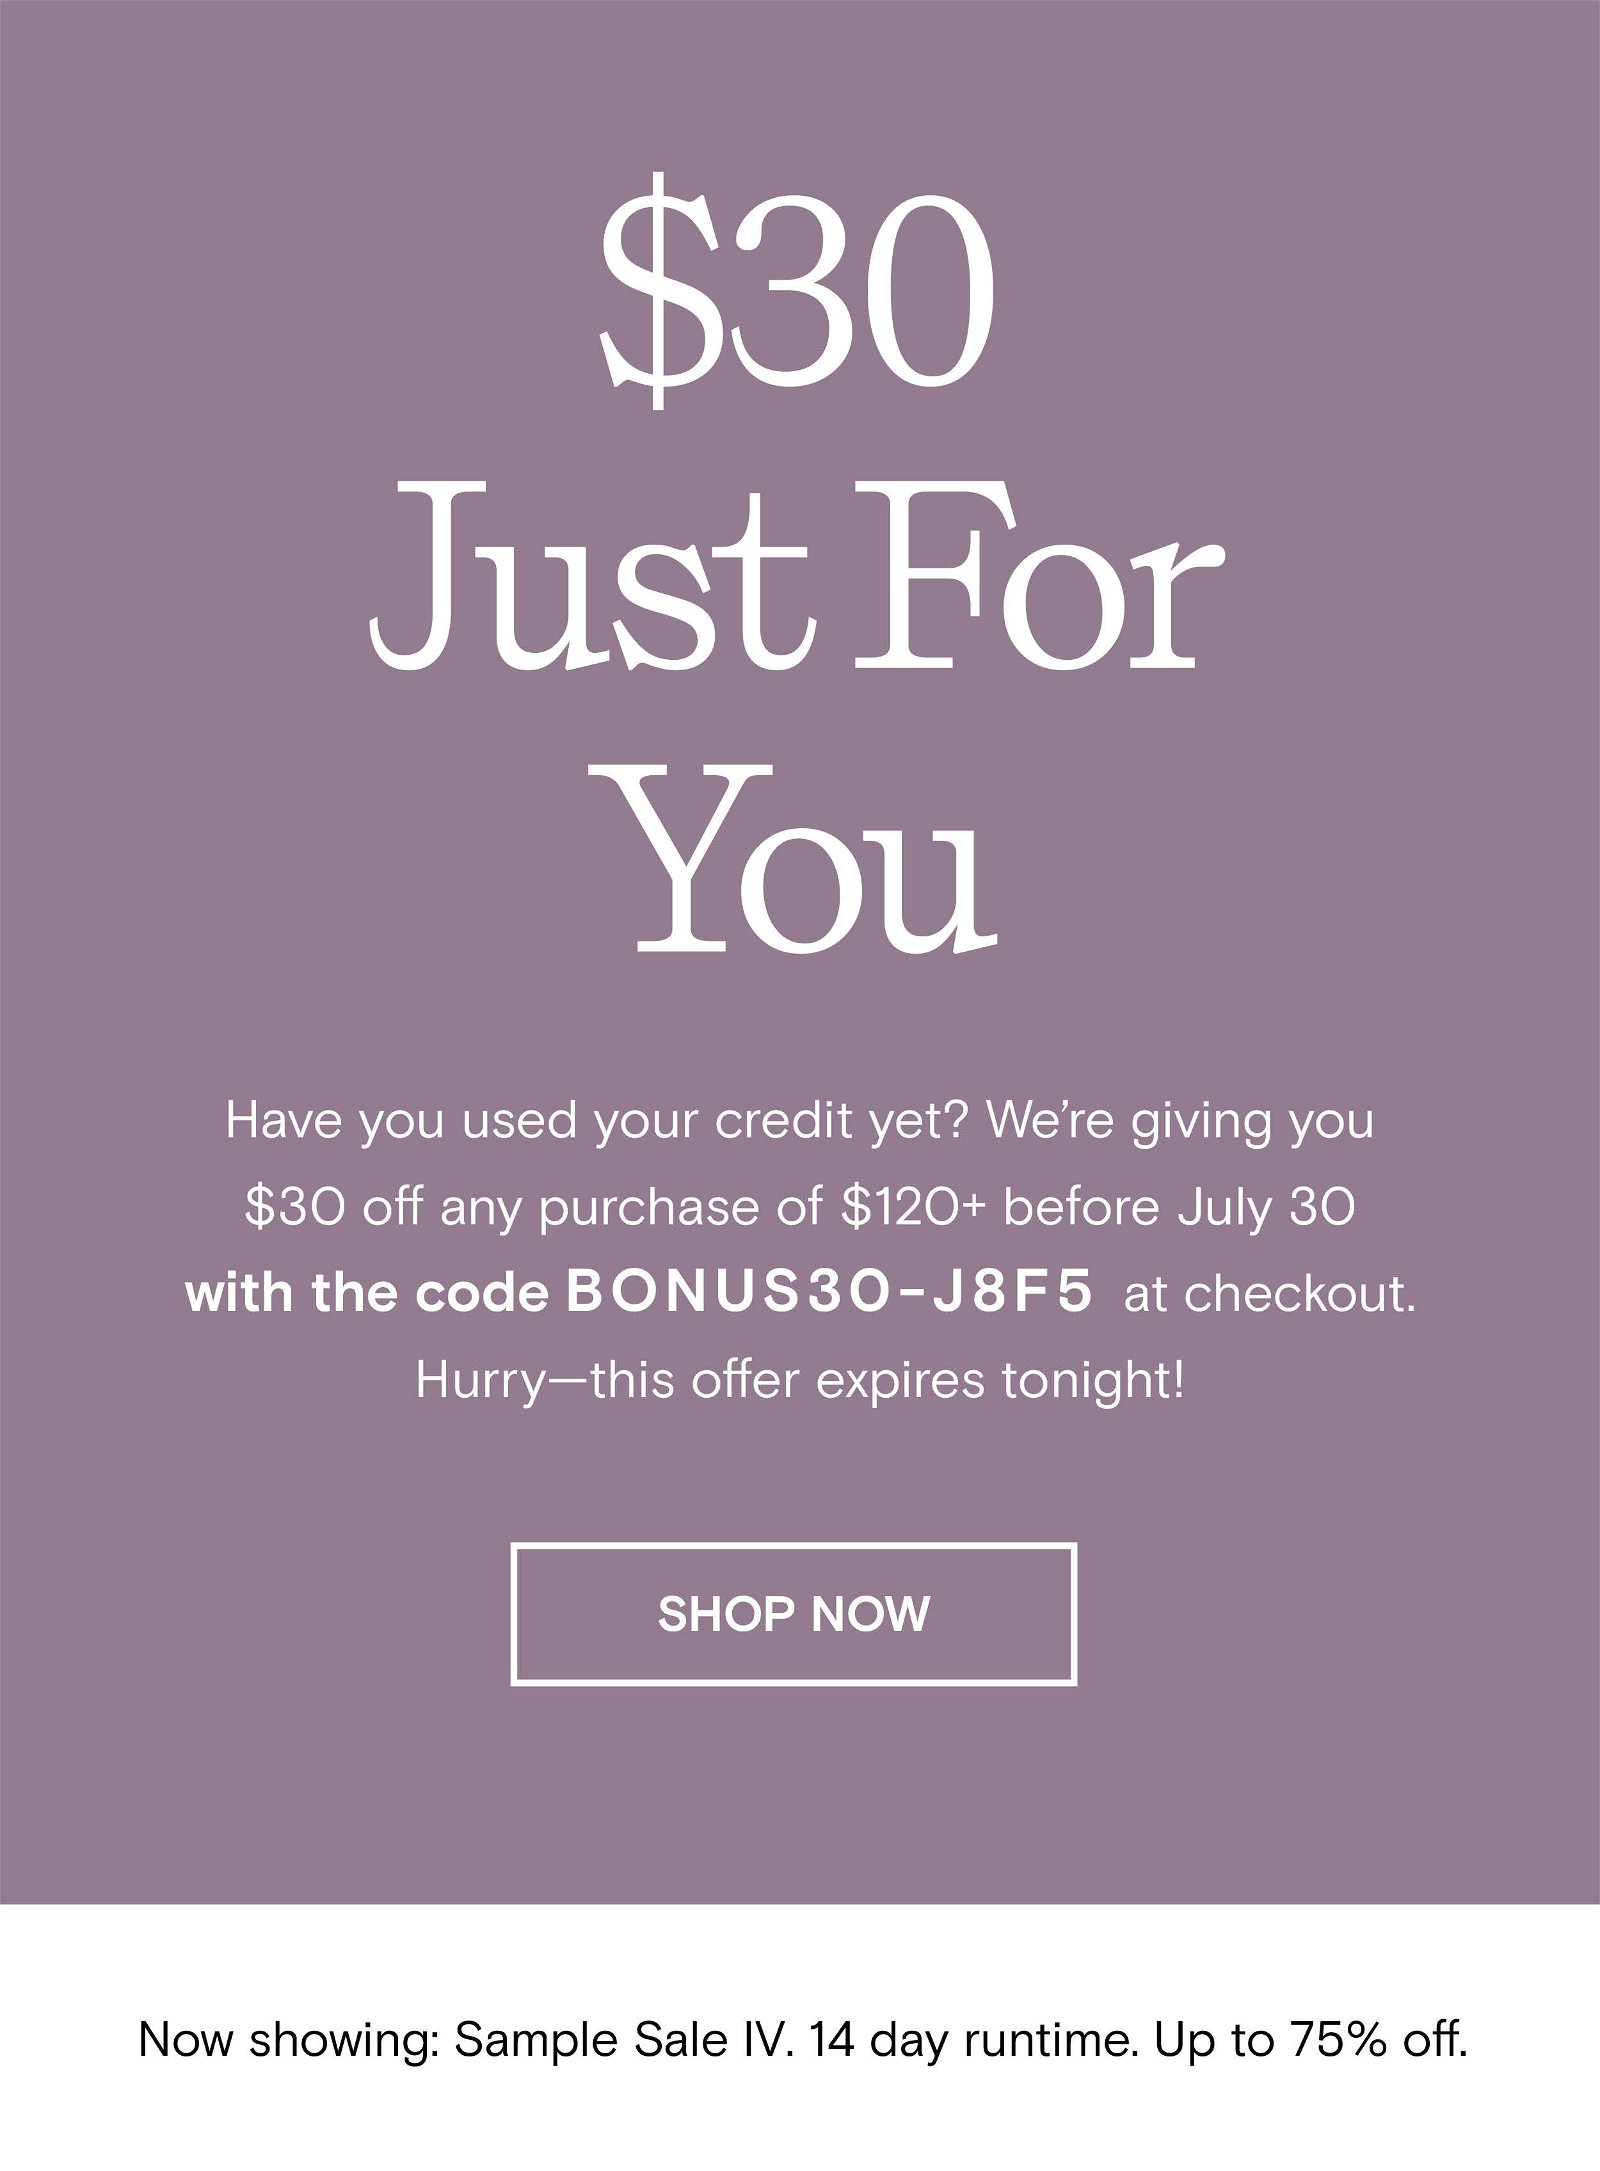 Here's $50 toward your next purchase